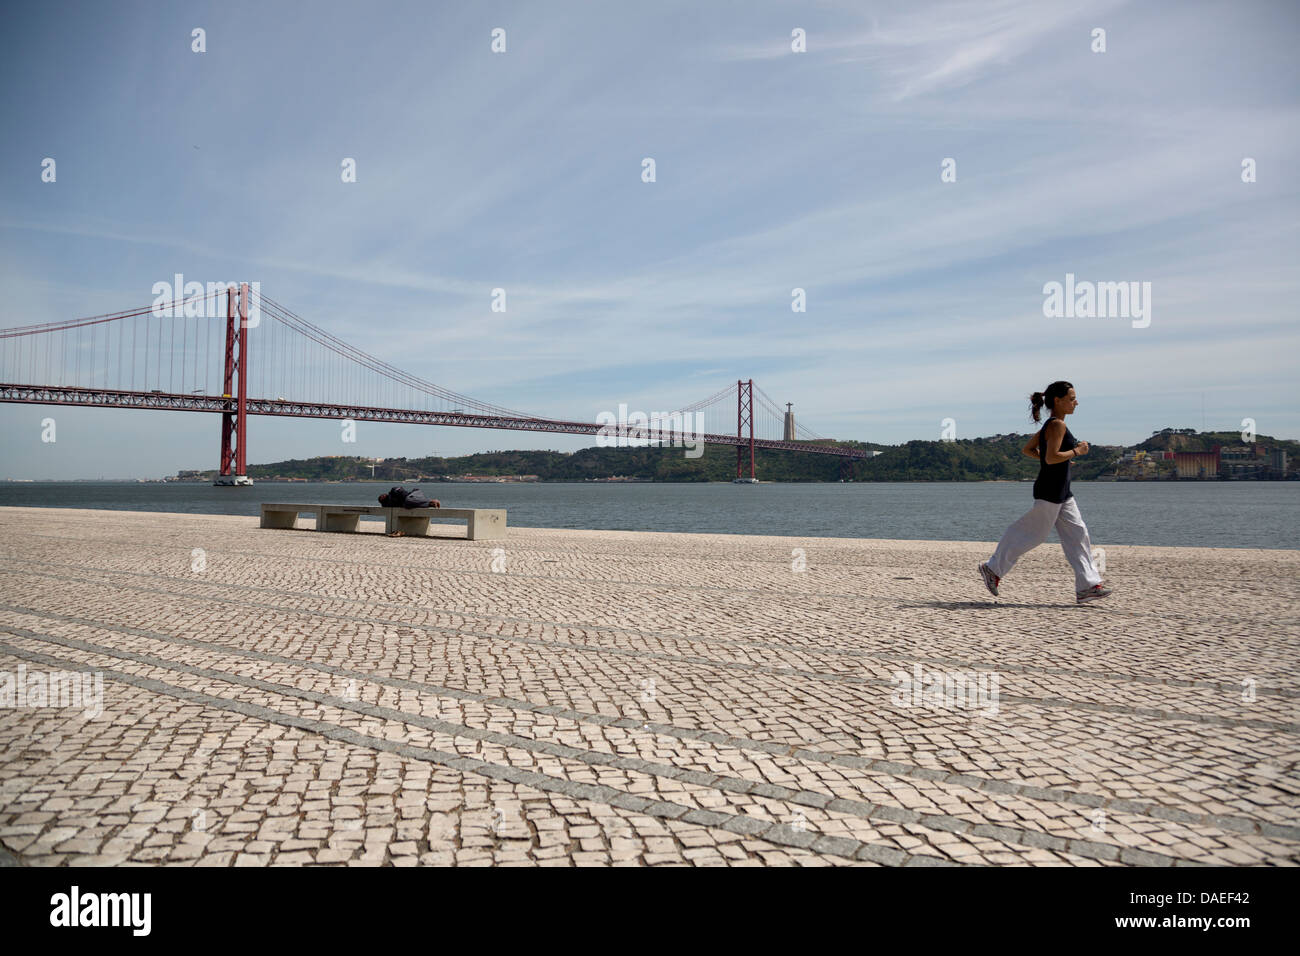 The Vasco da Gama cable-stayed Bridge flanked by viaducts and rangeviews that spans the Tagus in Parque das Nações in Lisbon Stock Photo